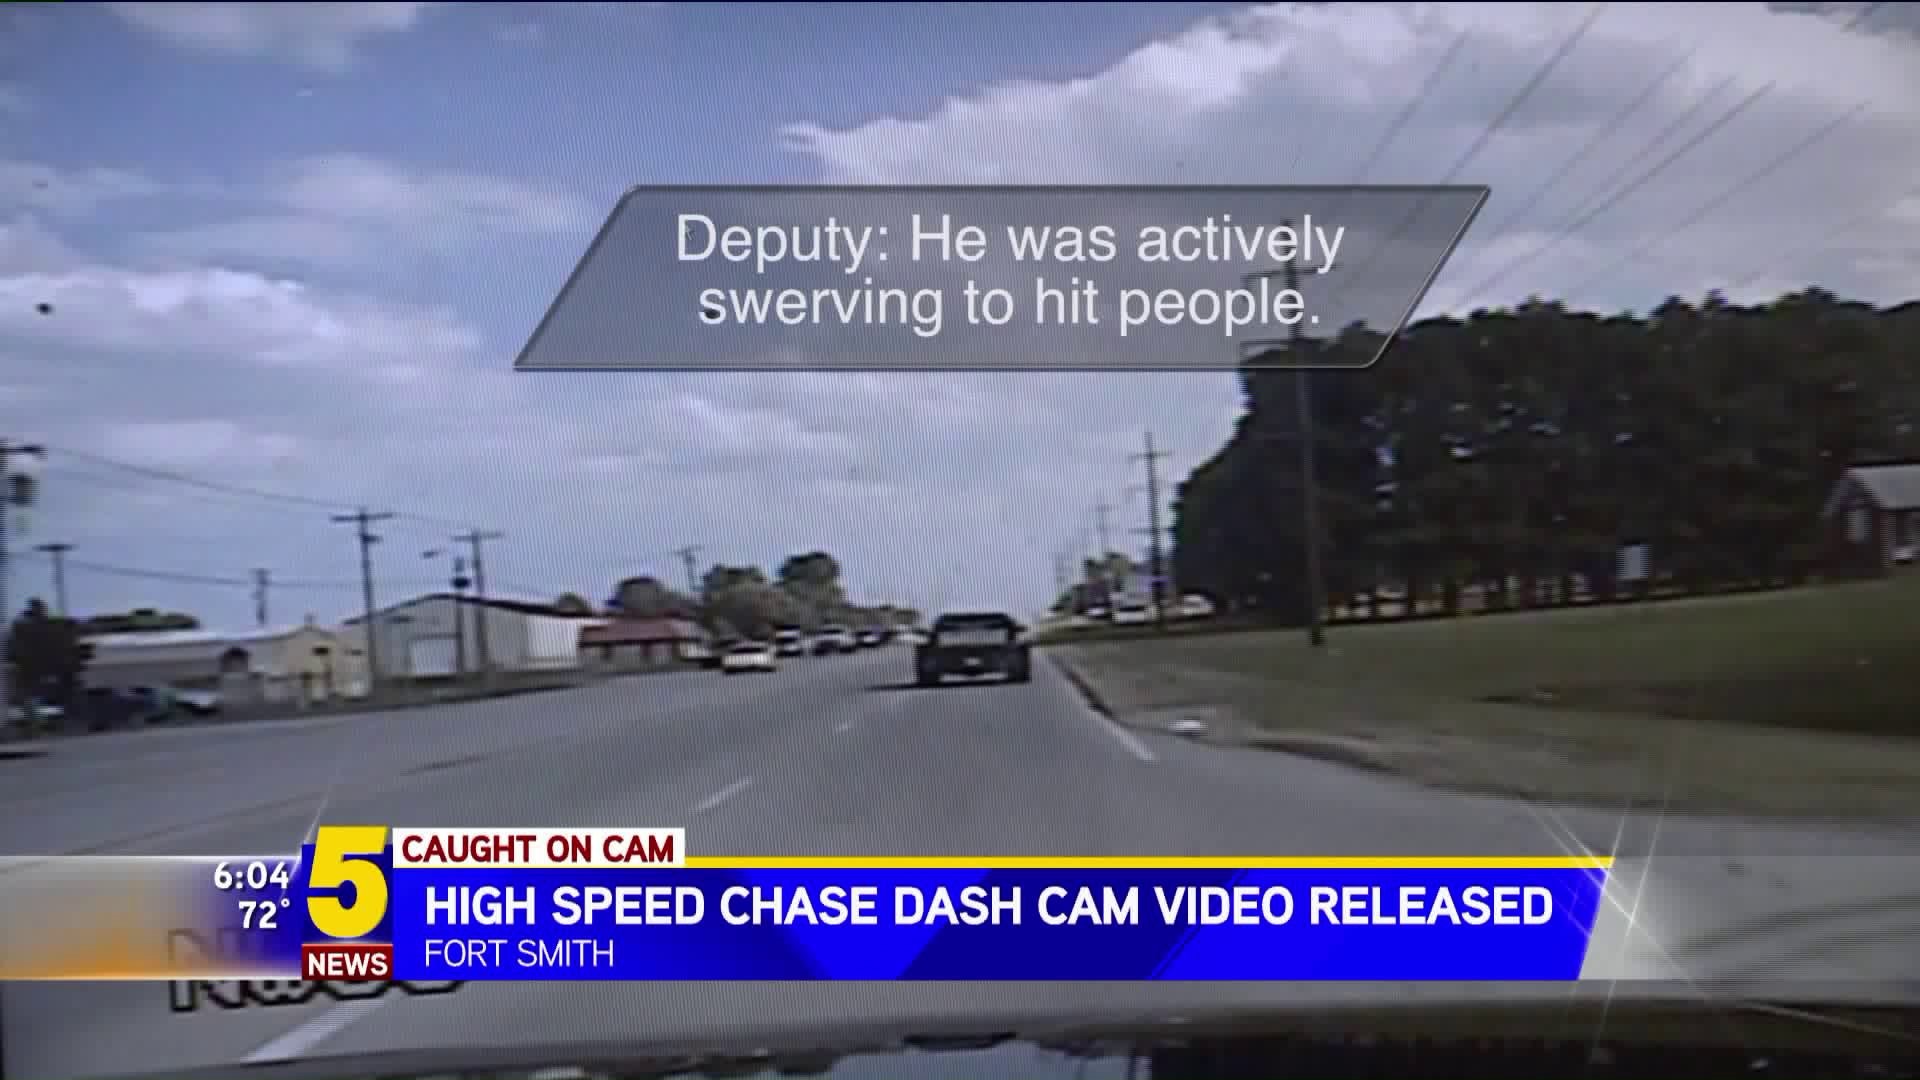 High Speed Chase Dash Cam Video Released